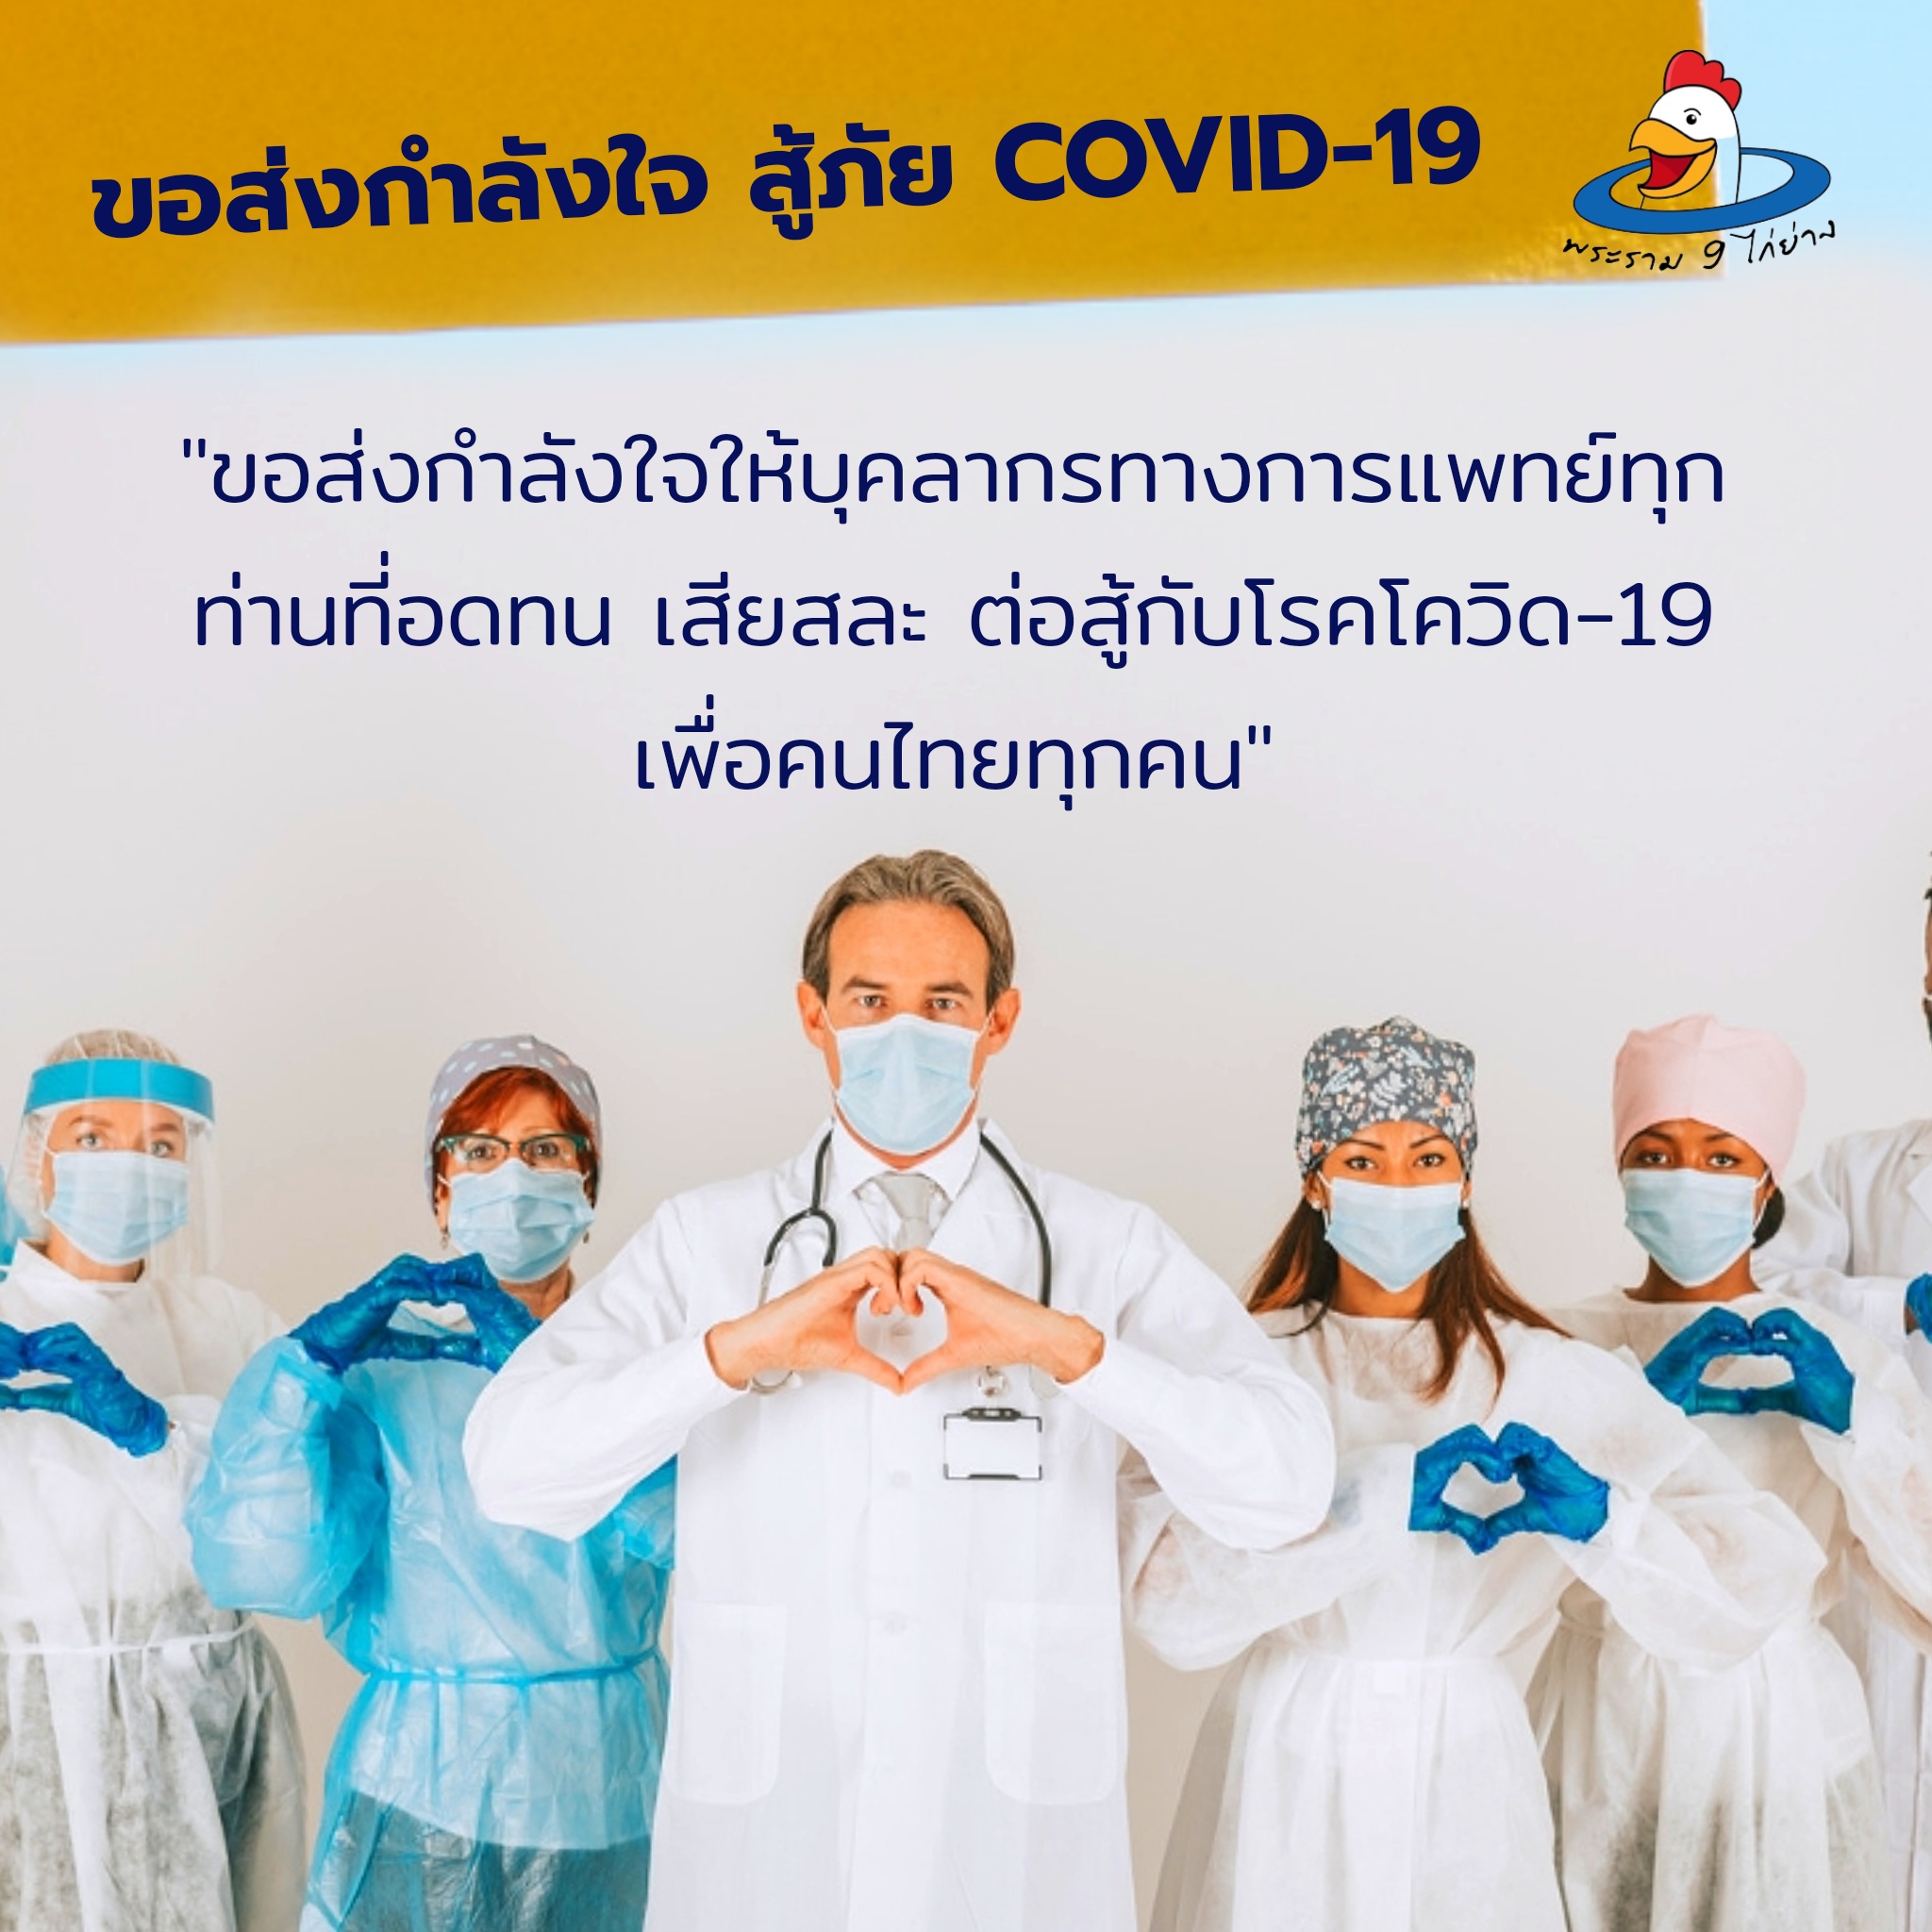 Encourage to fight covid-19 together